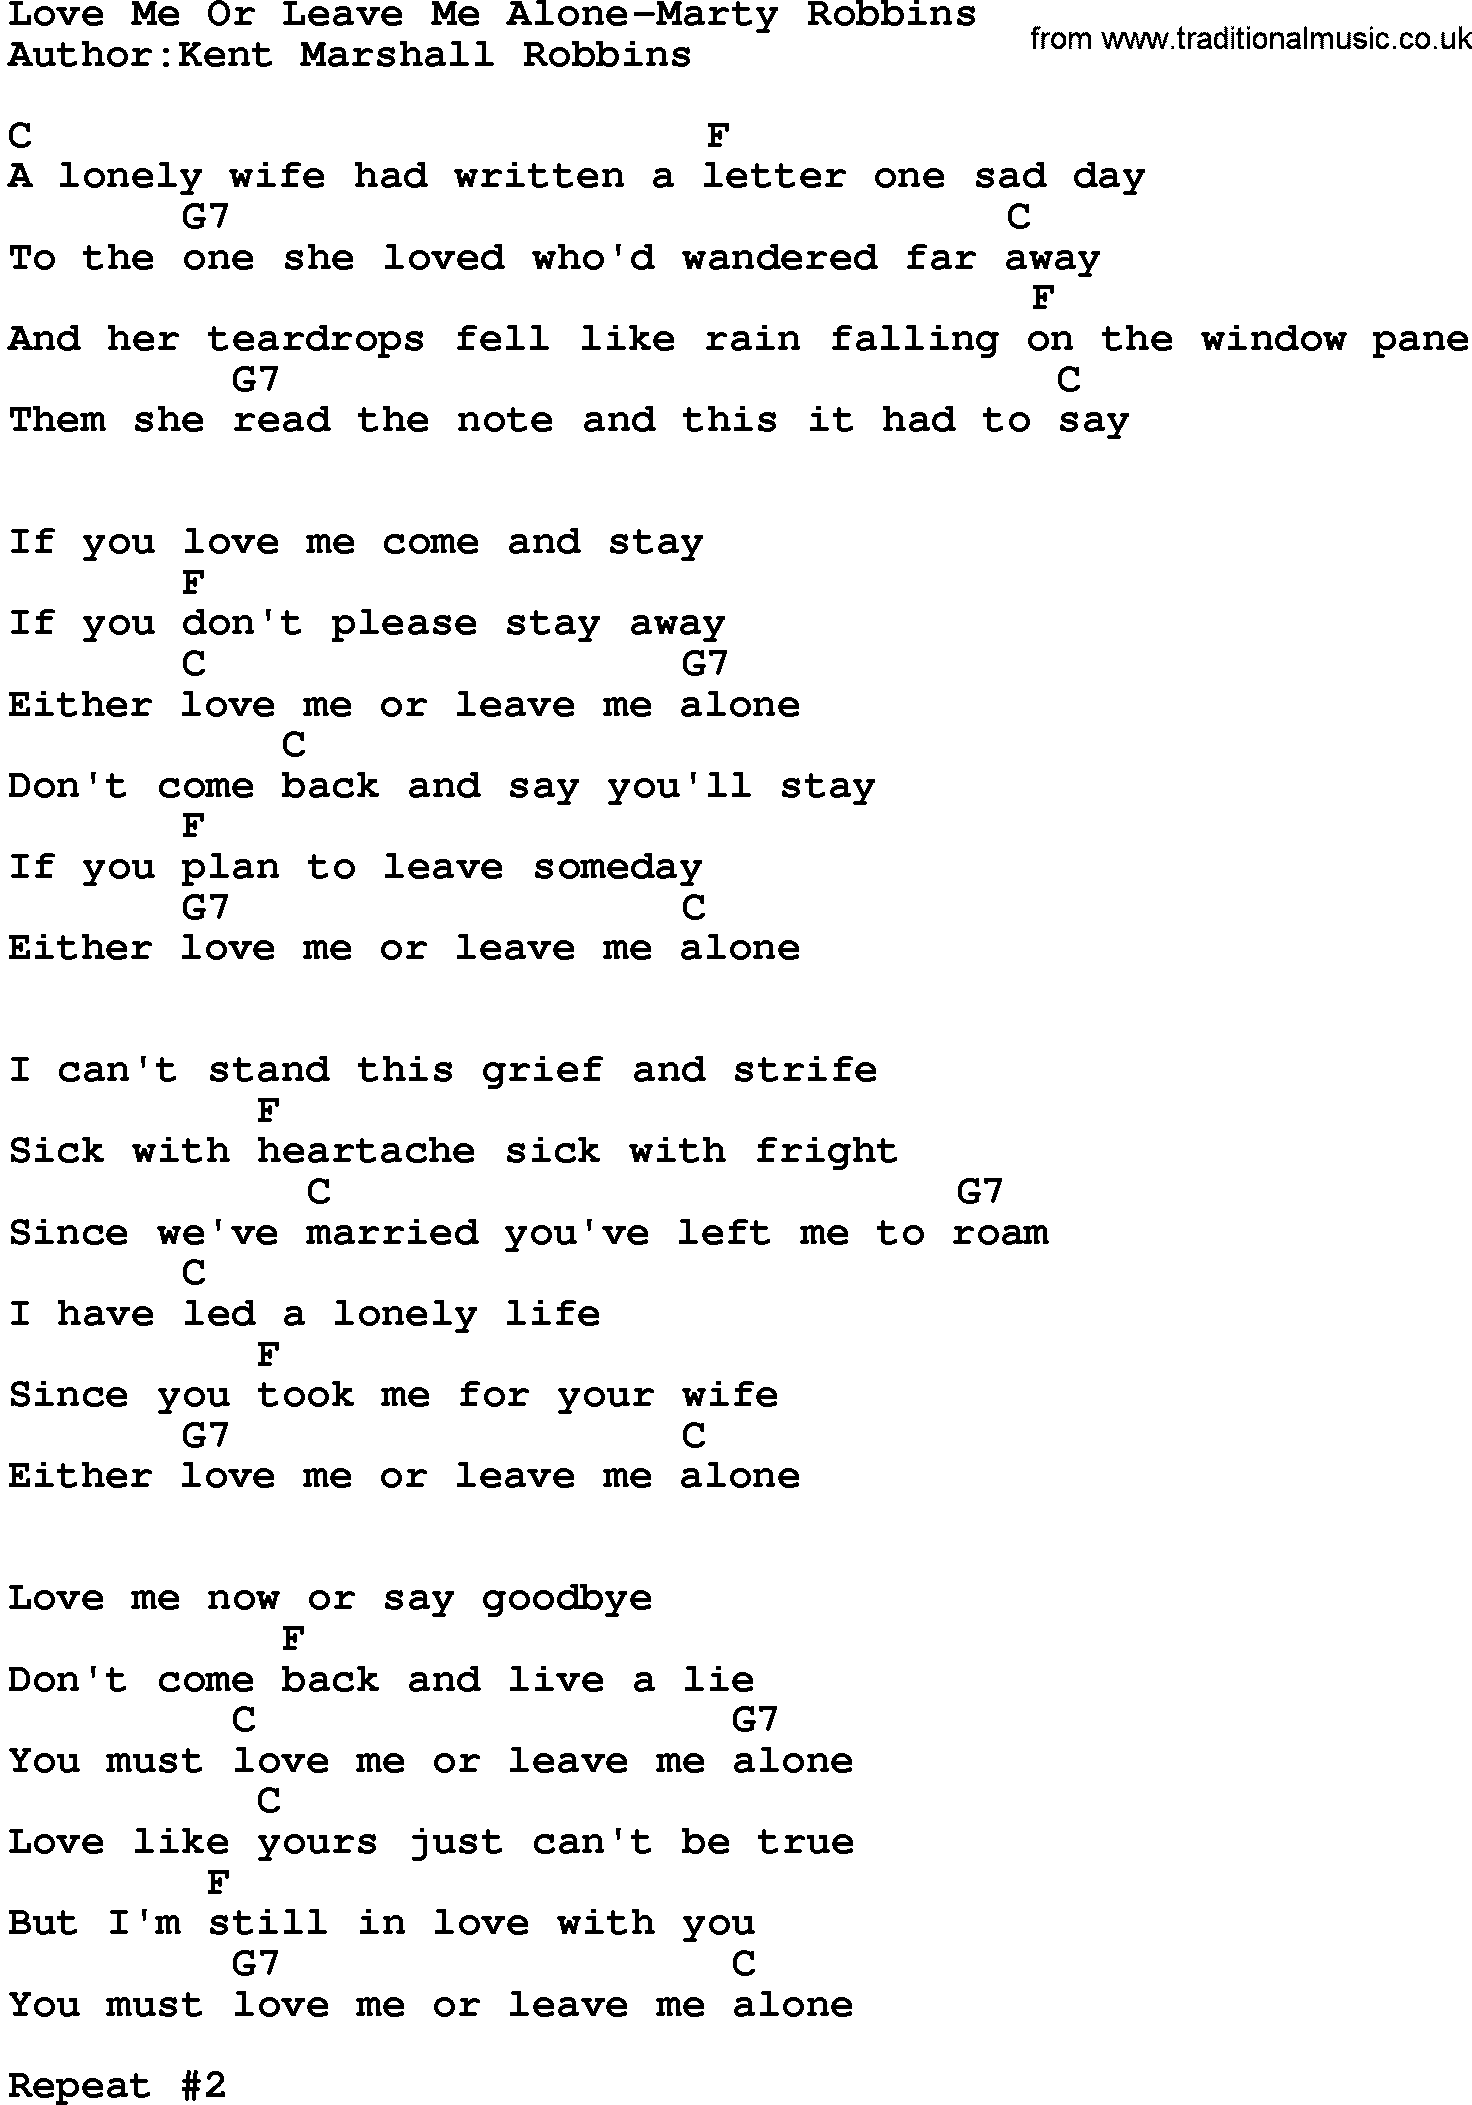 Country music song: Love Me Or Leave Me Alone-Marty Robbins lyrics and chords